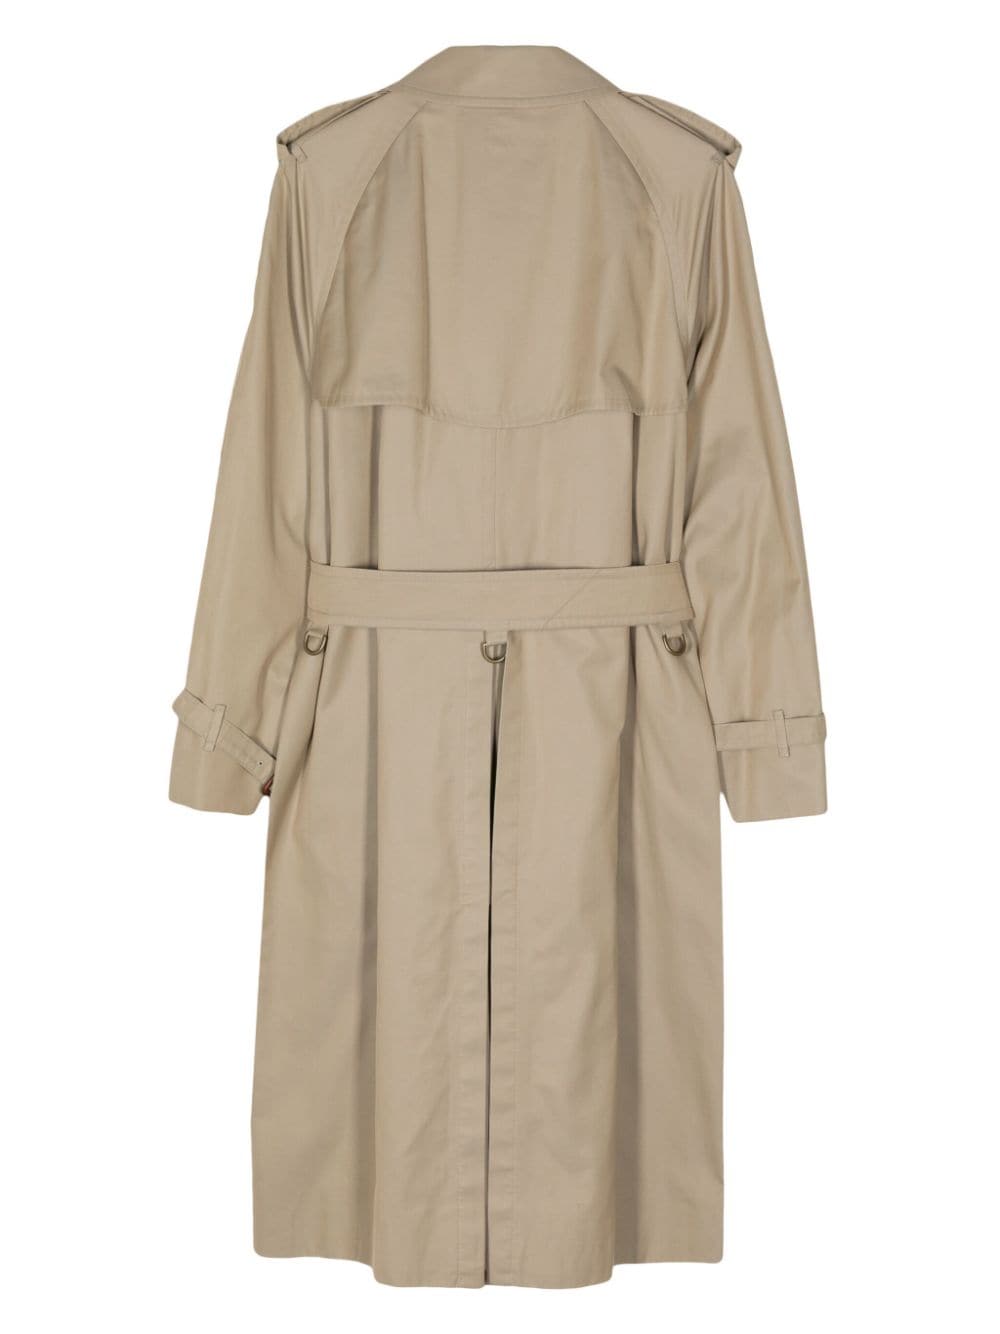 Burberry Pre-Owned 1990-2000s belted trench coat - Beige